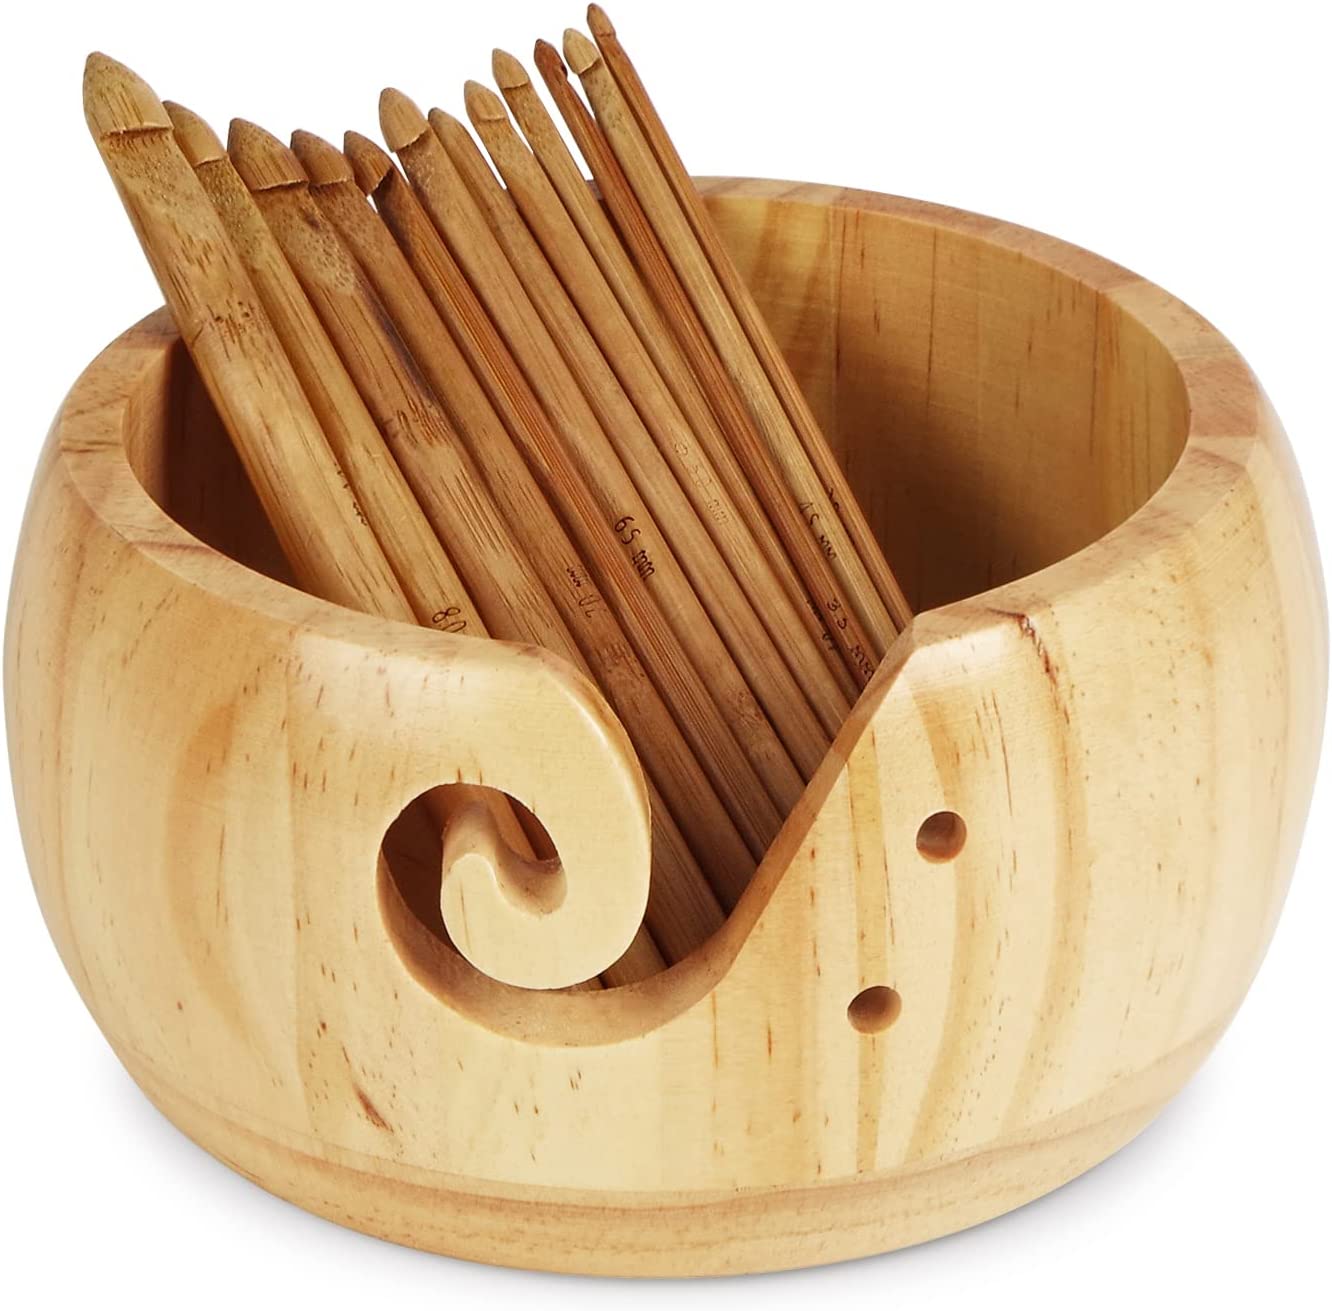 Handcrafted Wood Yarn Bowl for Knitting, Yarn bowl wooden with crochet  hooks